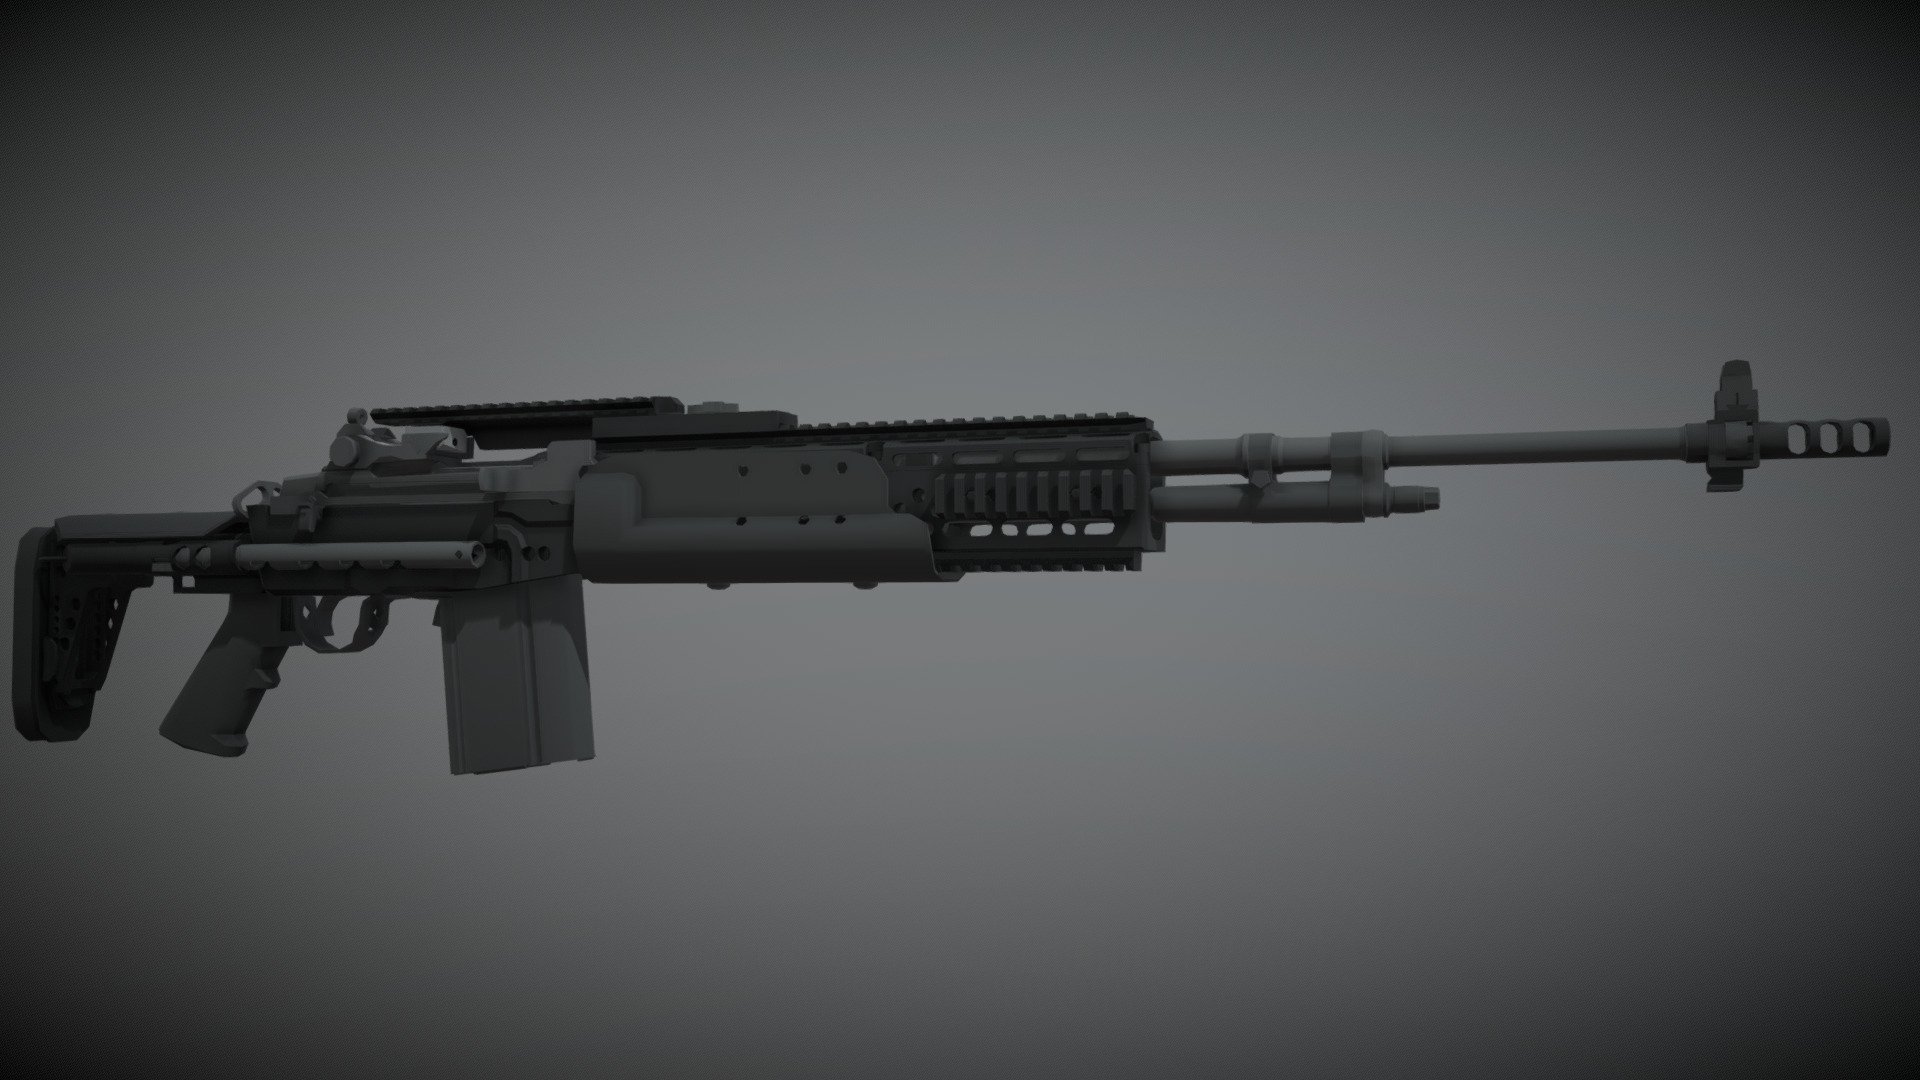 Low-Poly model of the Mk14 Enhanced battle rifle, essentially an M1A or M14 (in this case M14) inside an aluminum chassis made by sage arms.
It has a length and height-adjustible stock, a removable polymer handguard as well as a picatinny sight base mounted on the upper handguard and on the receiver 3d model